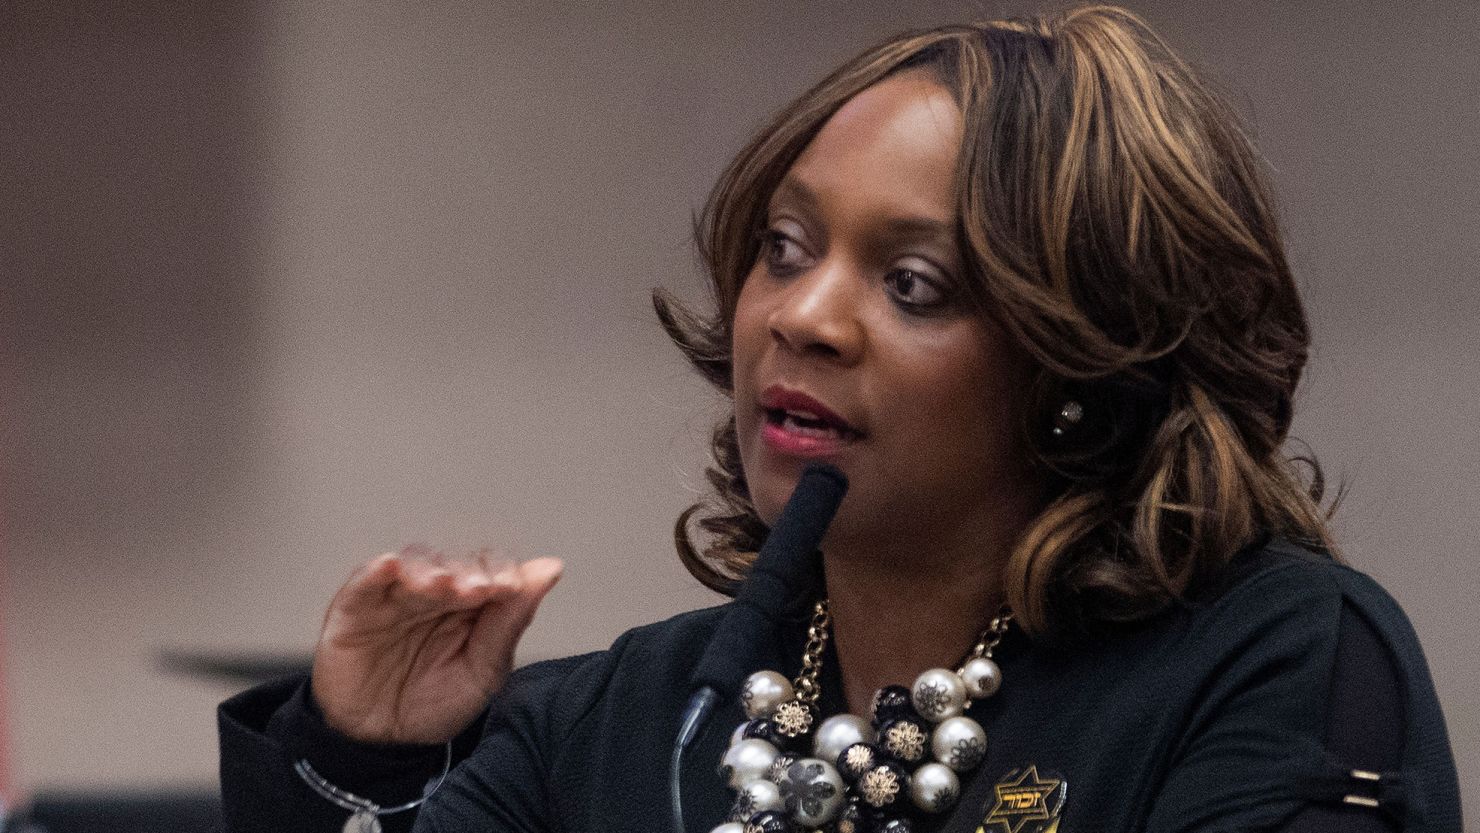 Alabama State Rep. Merika Coleman, pictured here during a 2019 debate, sponsored the amendment to remove racist and outdated language from the state's constitution, which passed Tuesday.